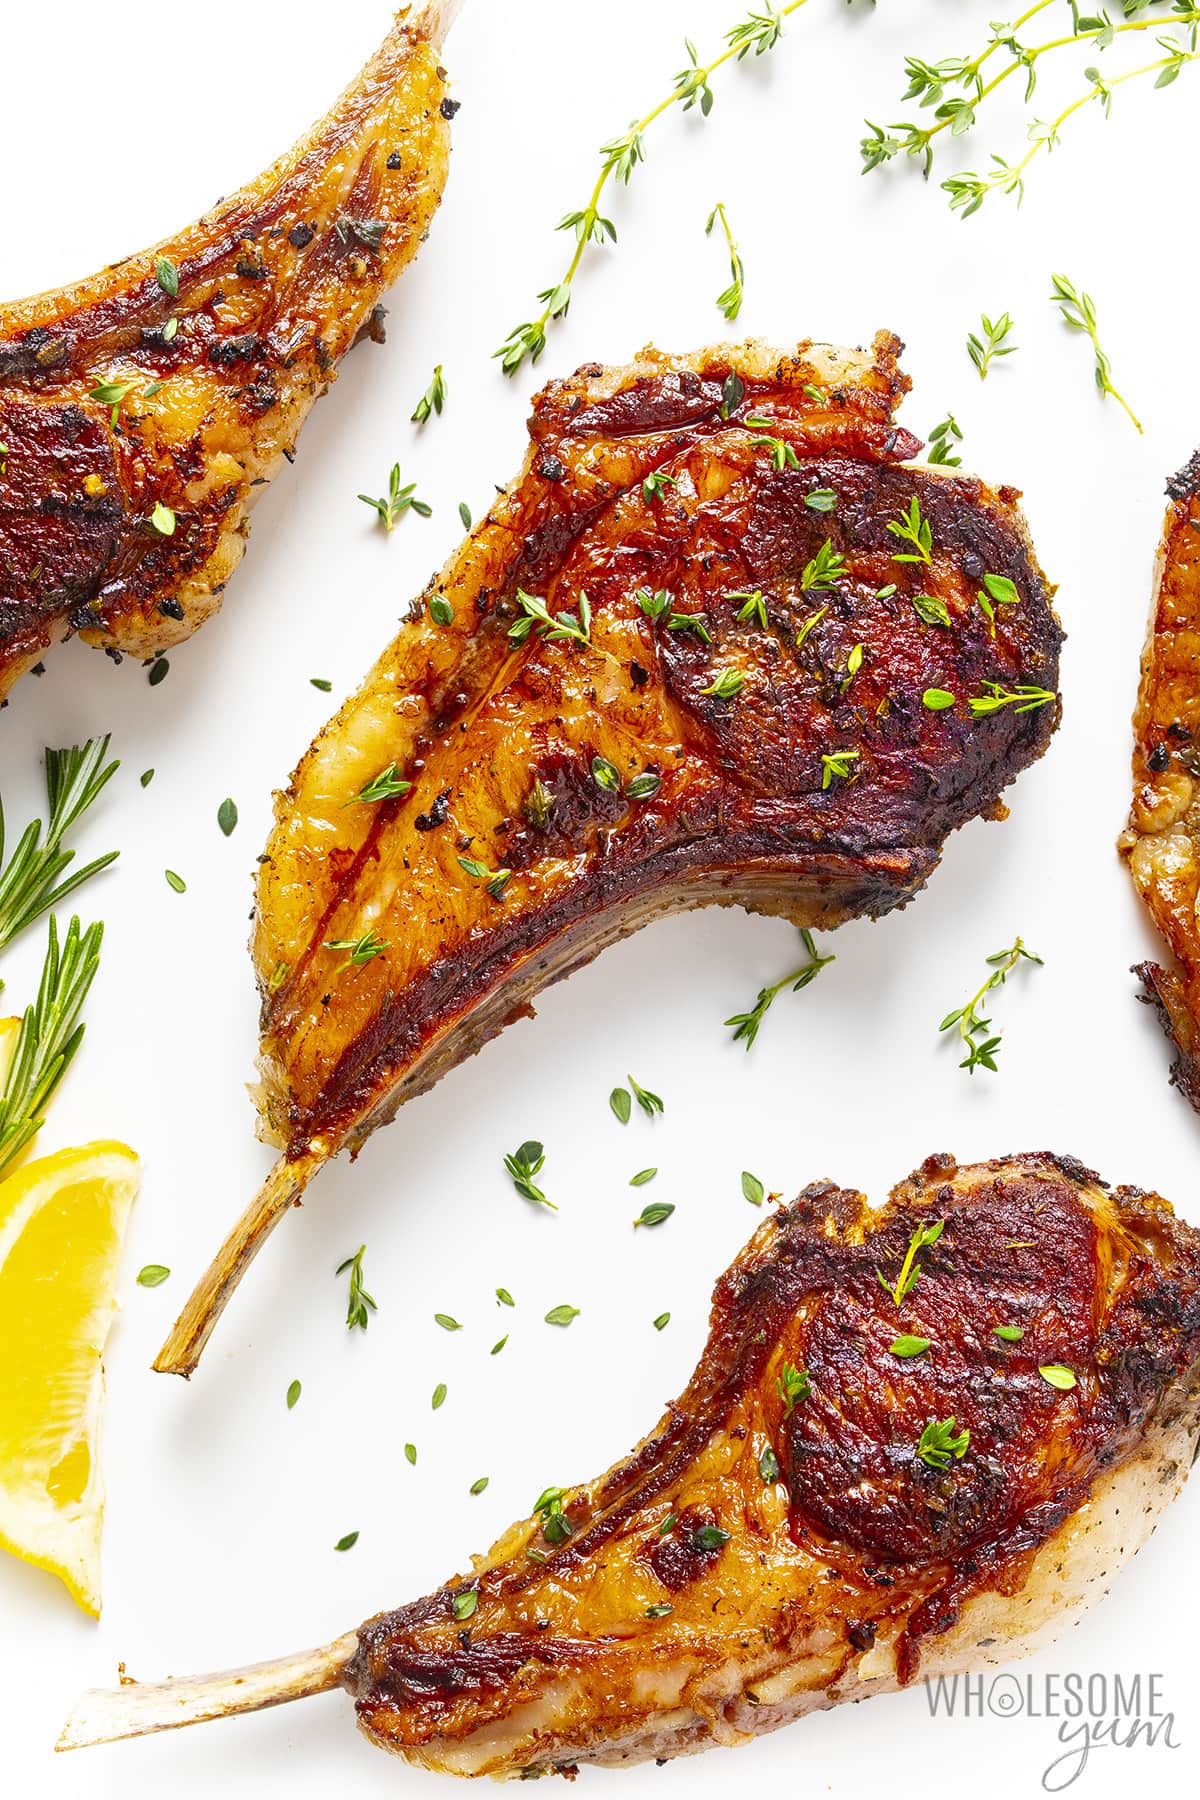 Oven baked lamb chops on a white surface.